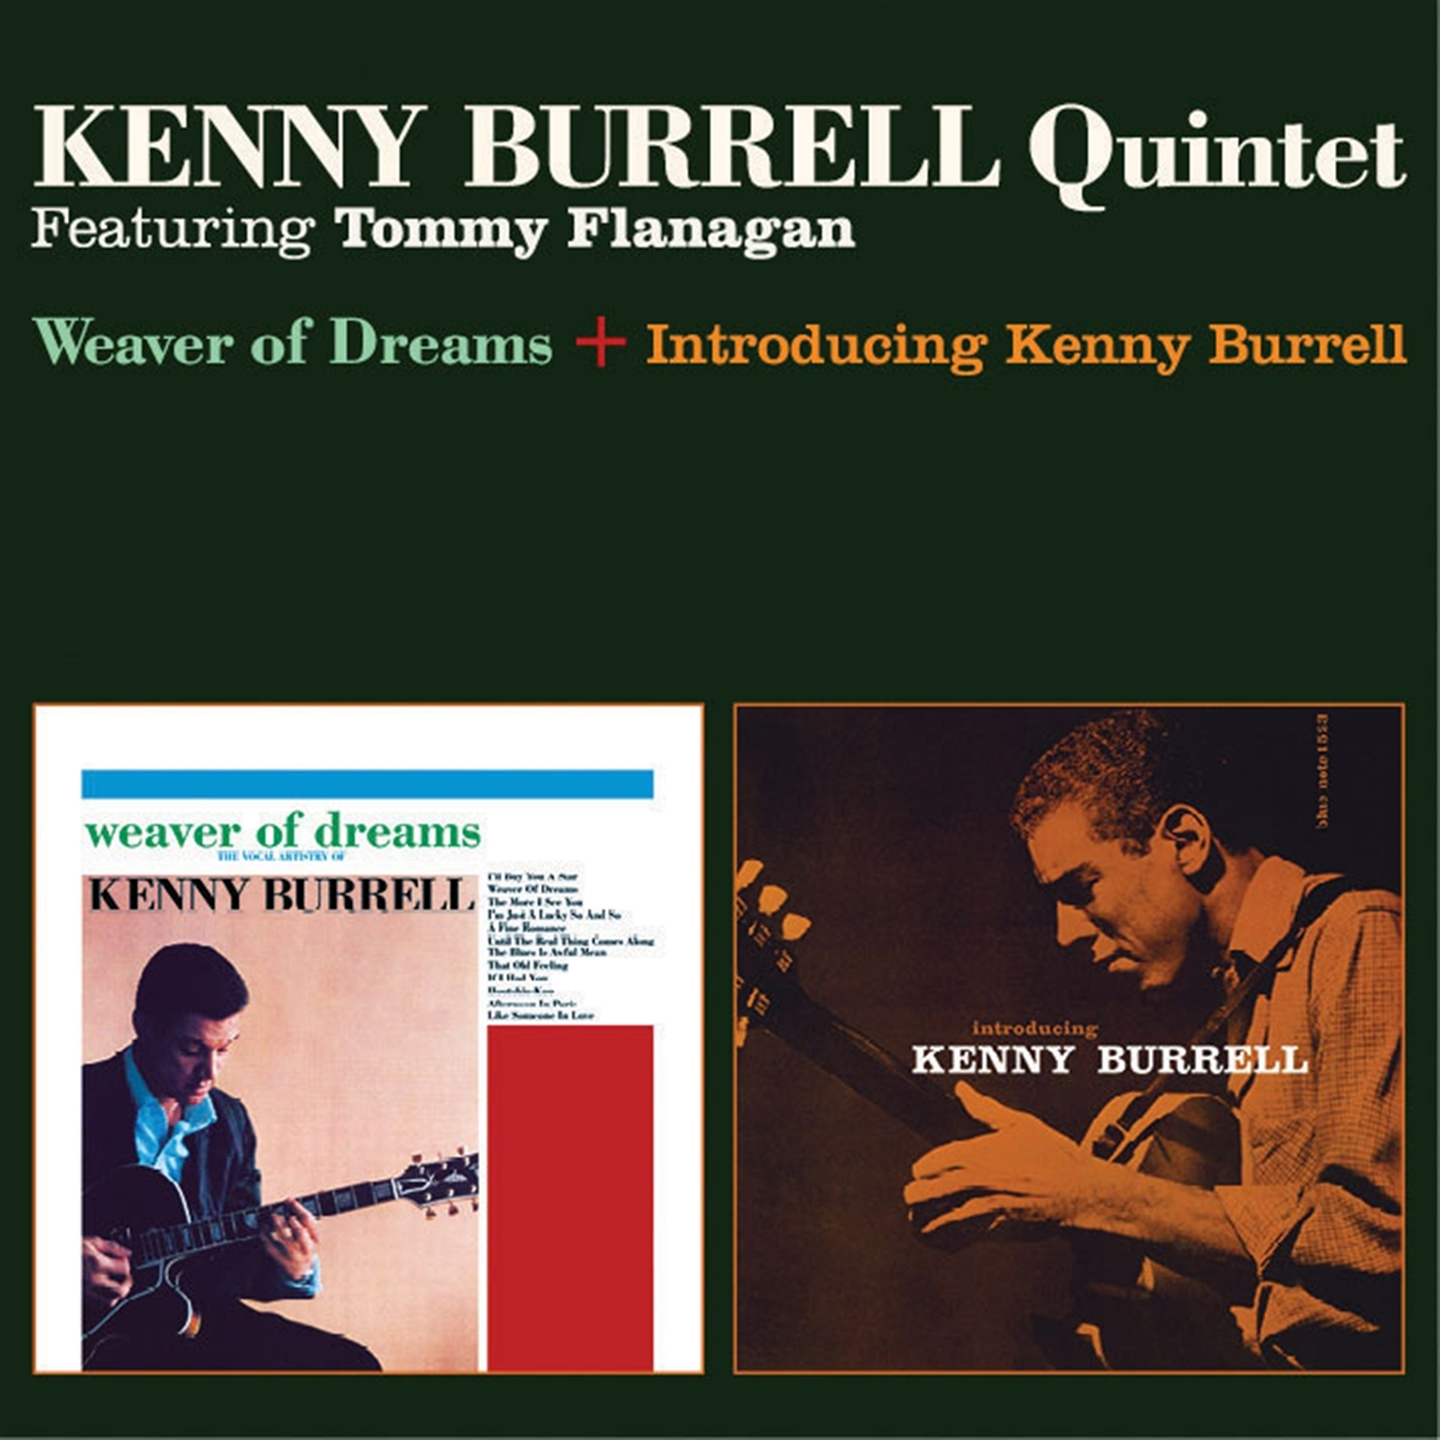 WEAVER OF DREAMS (+ INTRODUCING KENNY BURRELL)